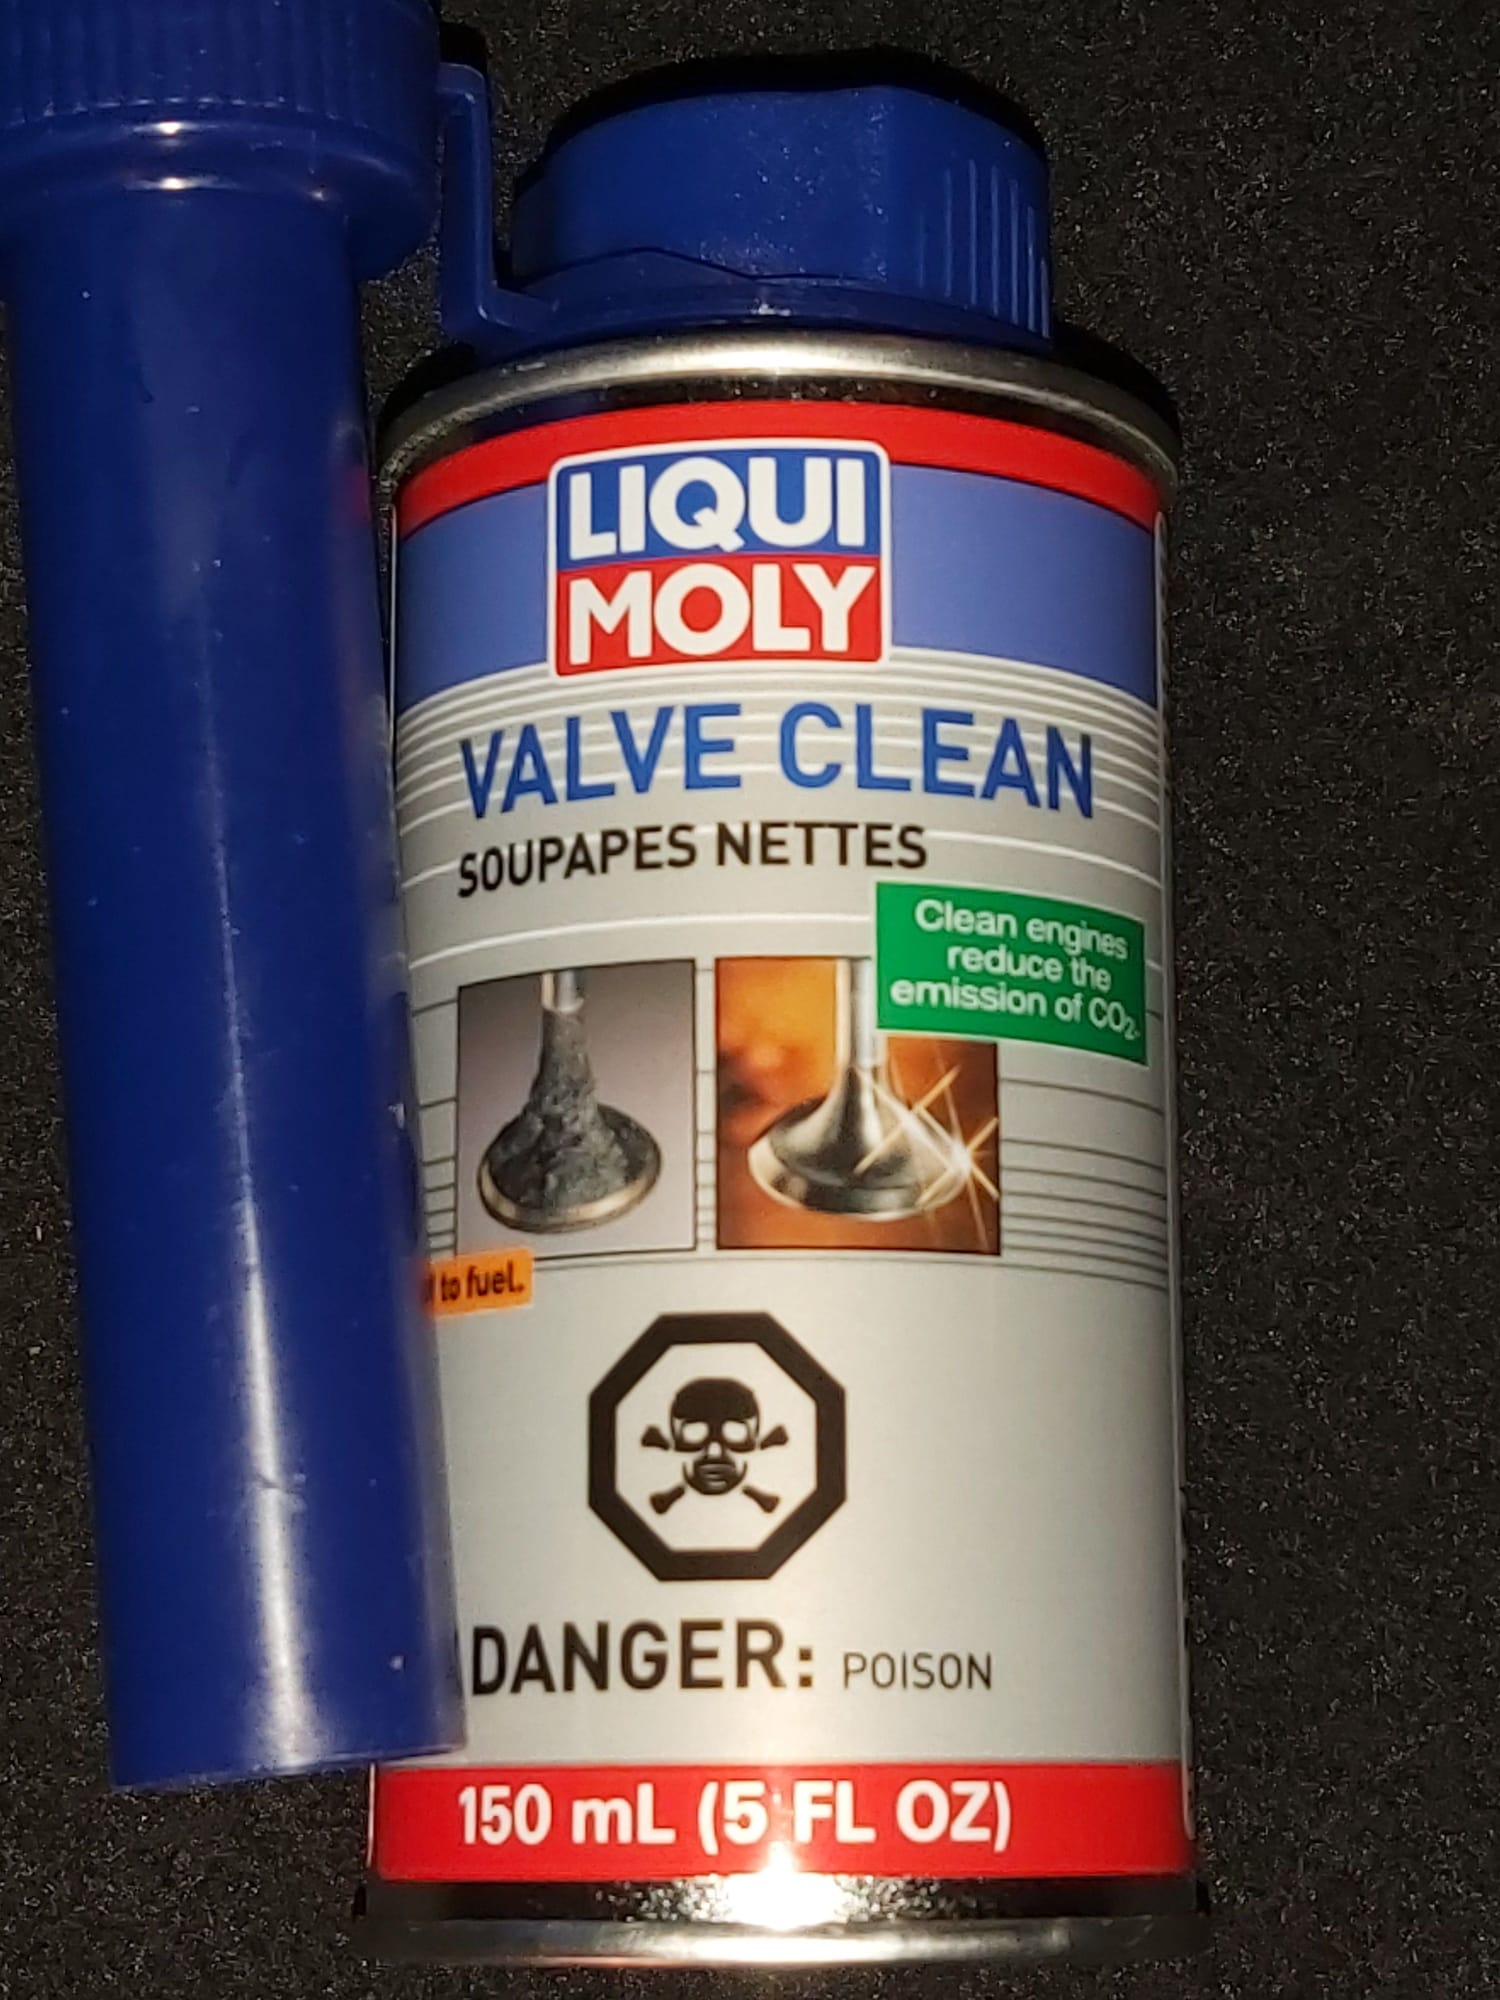 LIQUI MOLY COMBO SET 2 IN 1 (INJECTION CLEANER + VALVE CLEAN